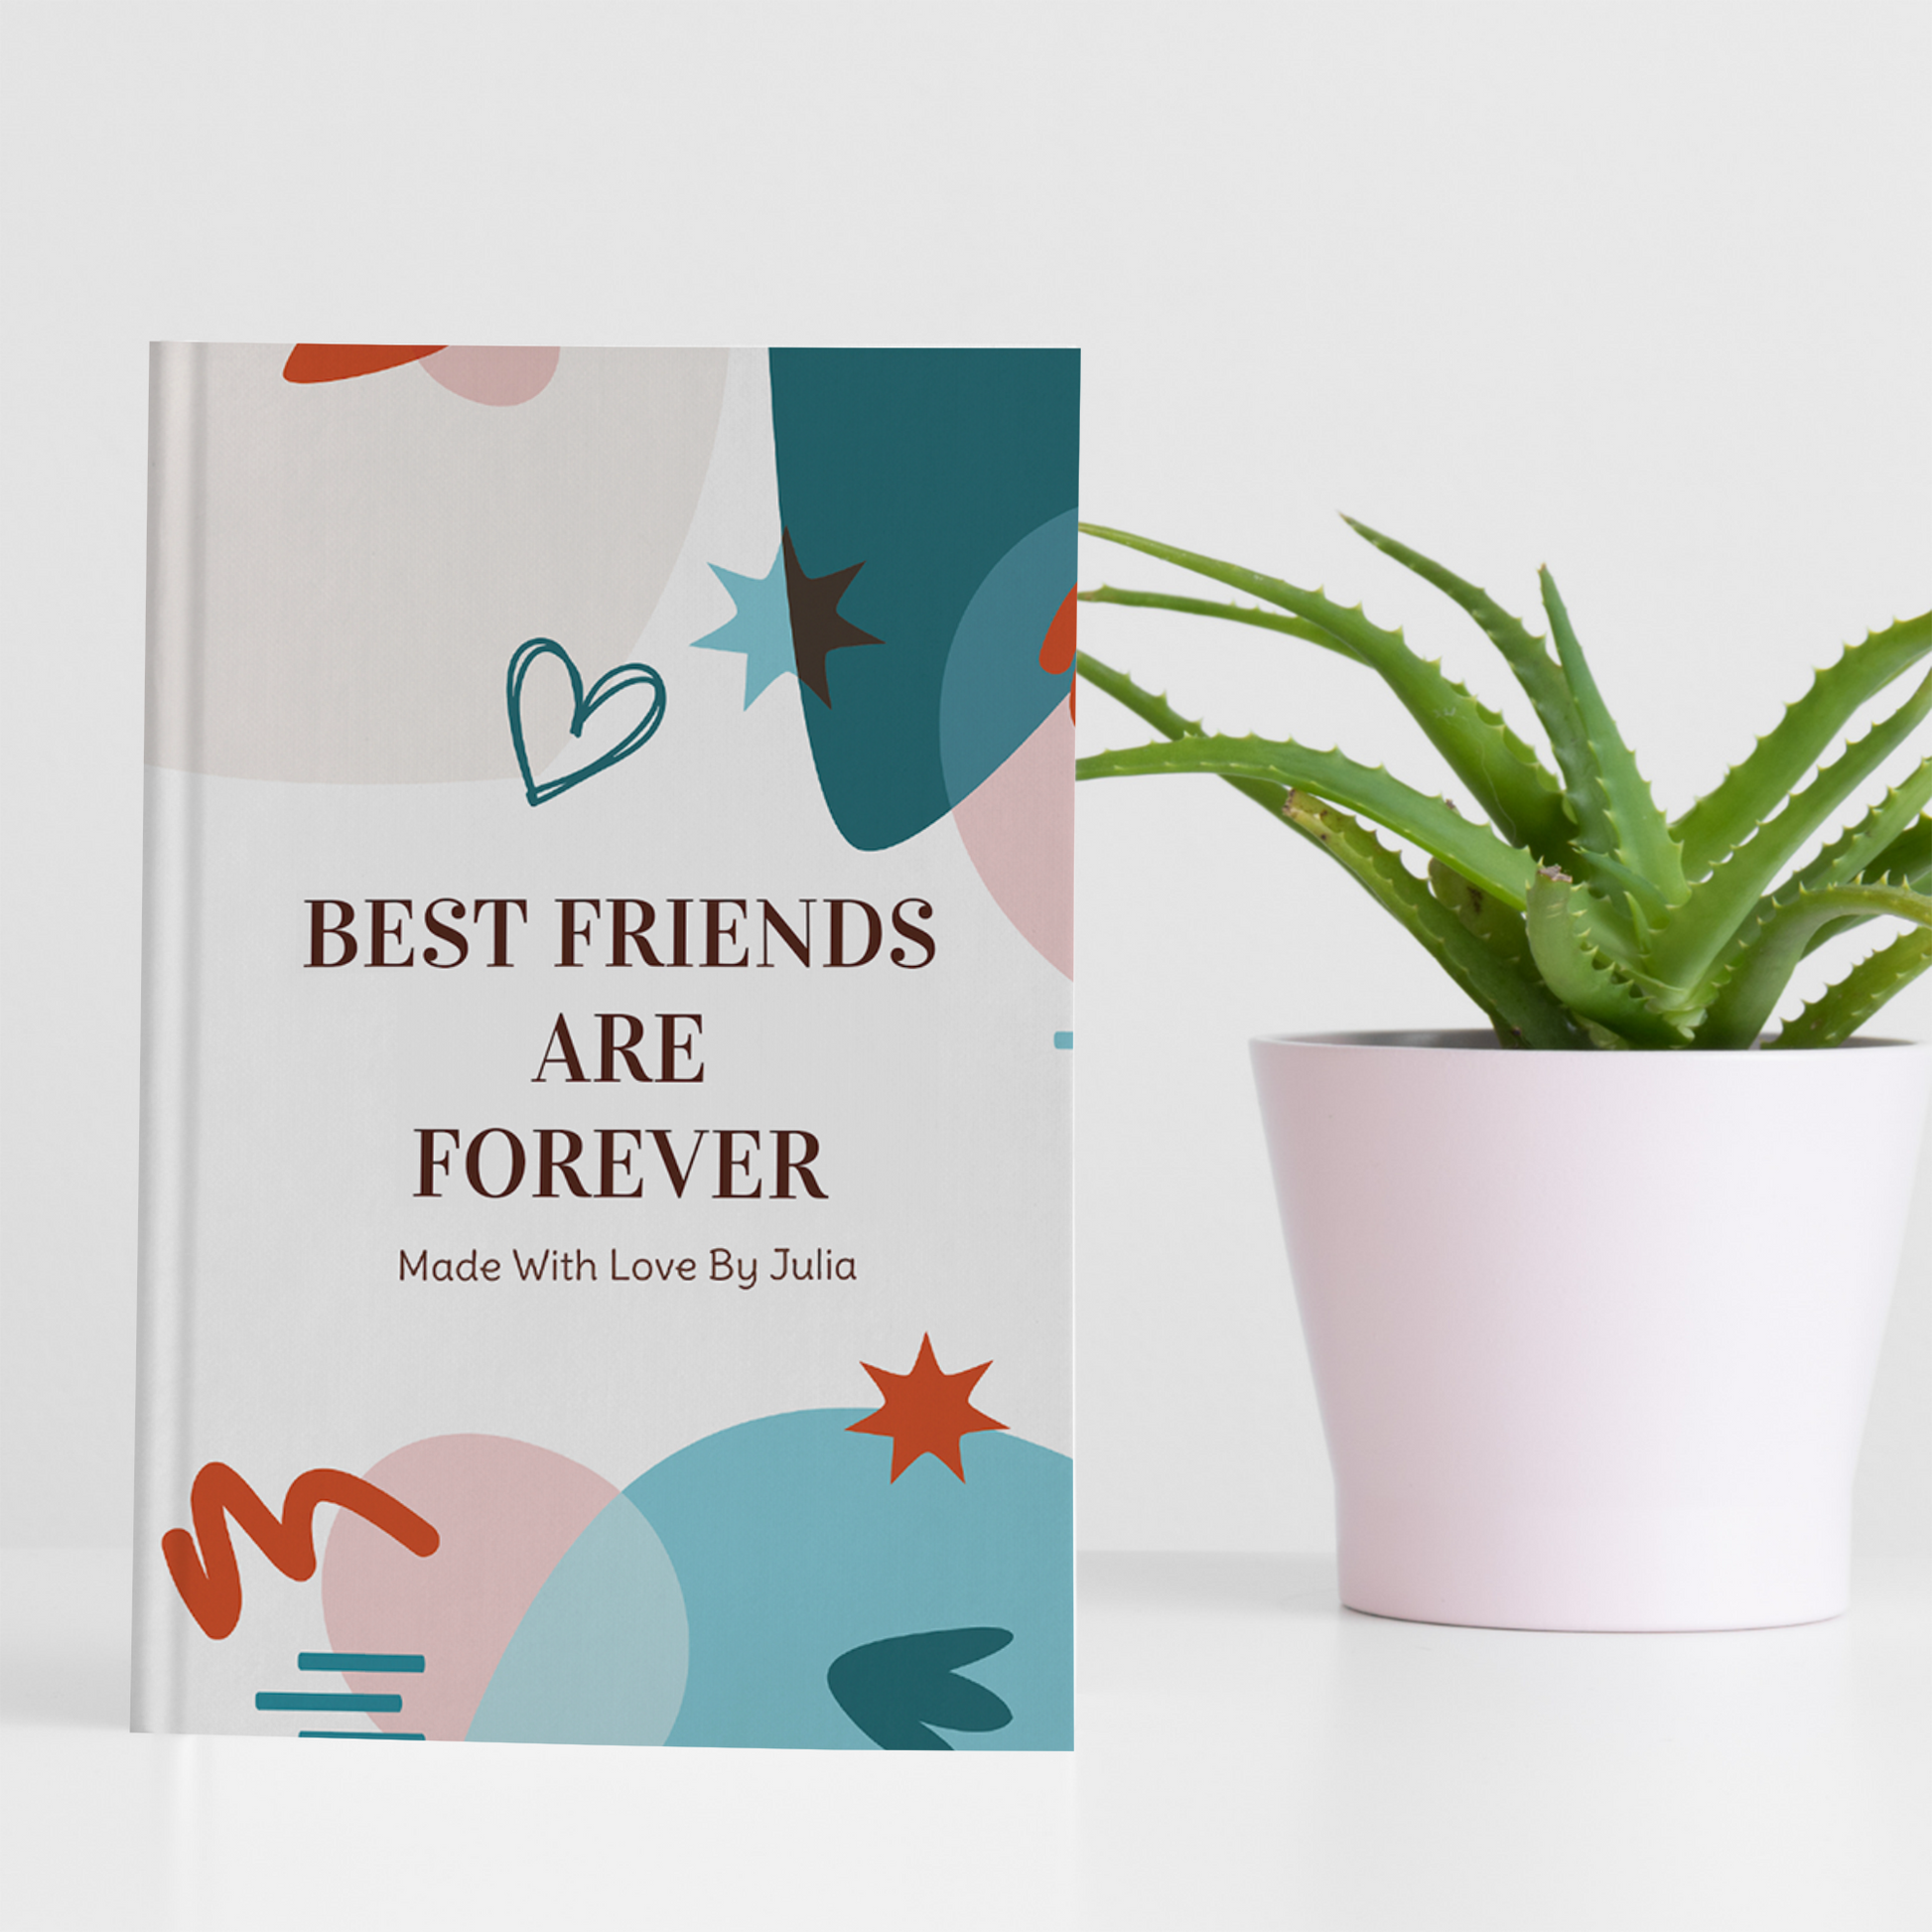 Reasons Why I Love You Book, Personalized Gift For Boyfriend / Girlfriend -  Luhvee Books - Luhvee Books